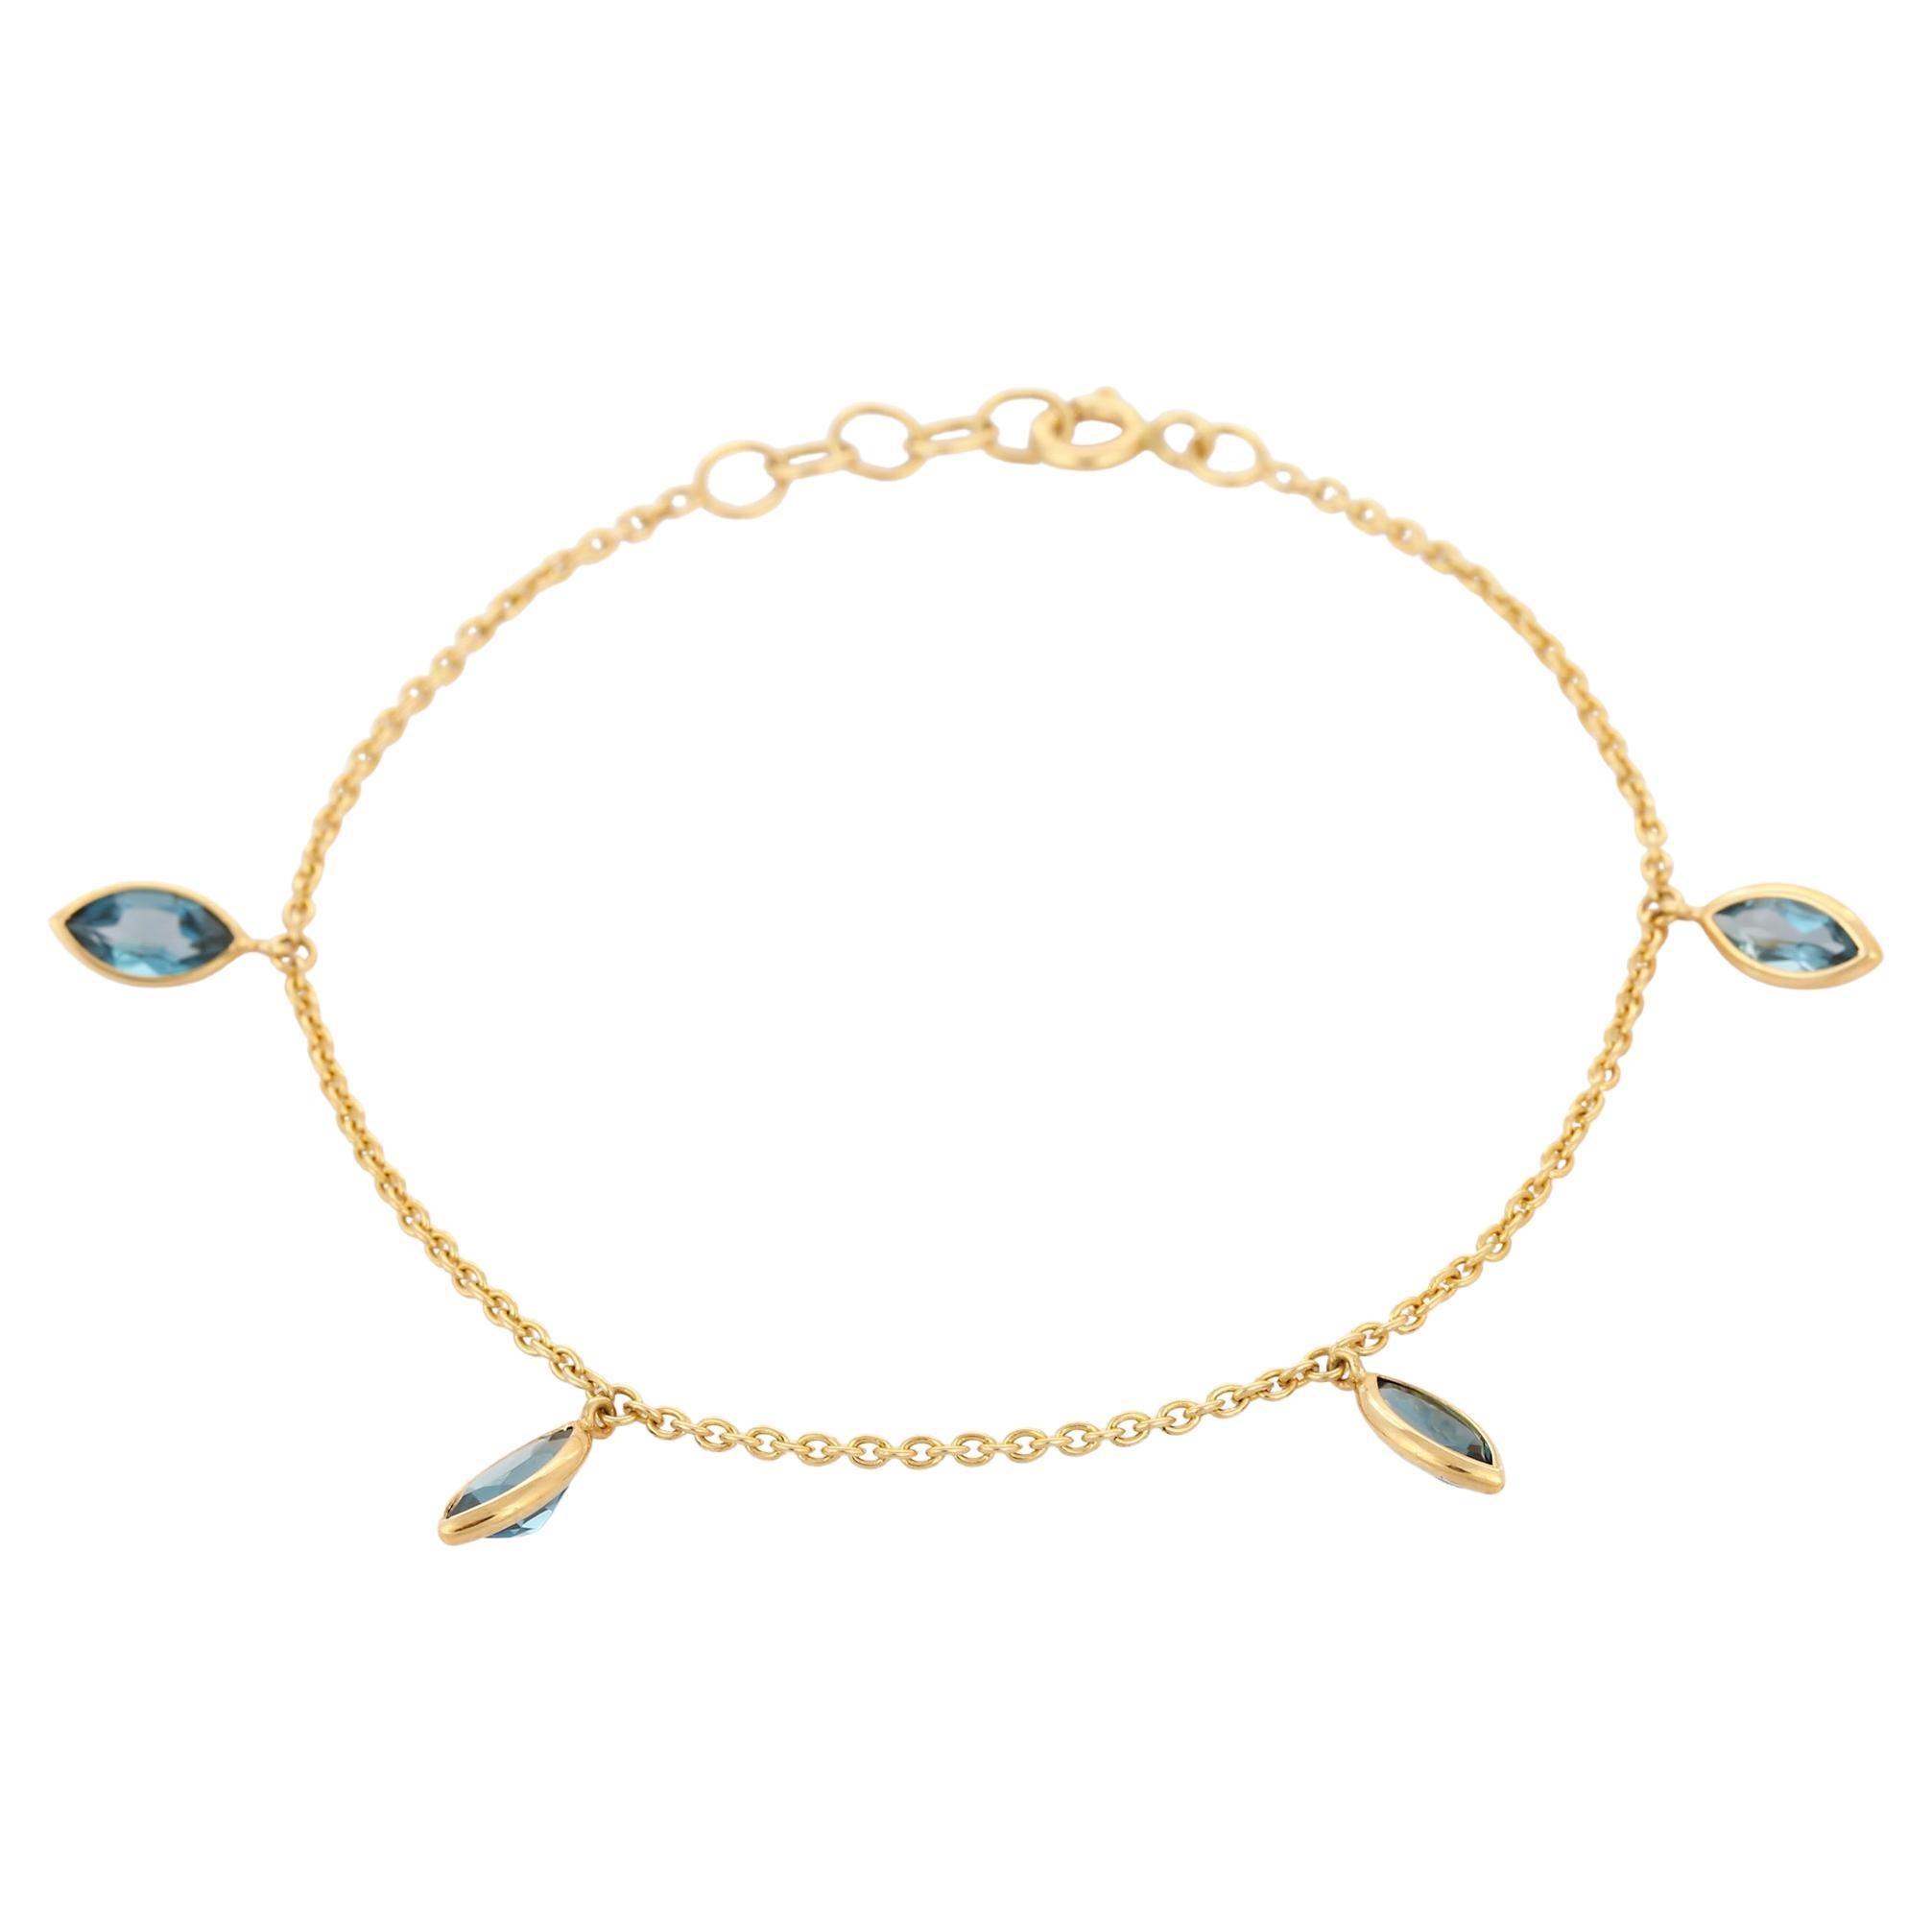 Marquise 2.54 Ct Blue Topaz Dangling Charm Bracelet Inlaid in 18K Yellow Gold For Sale